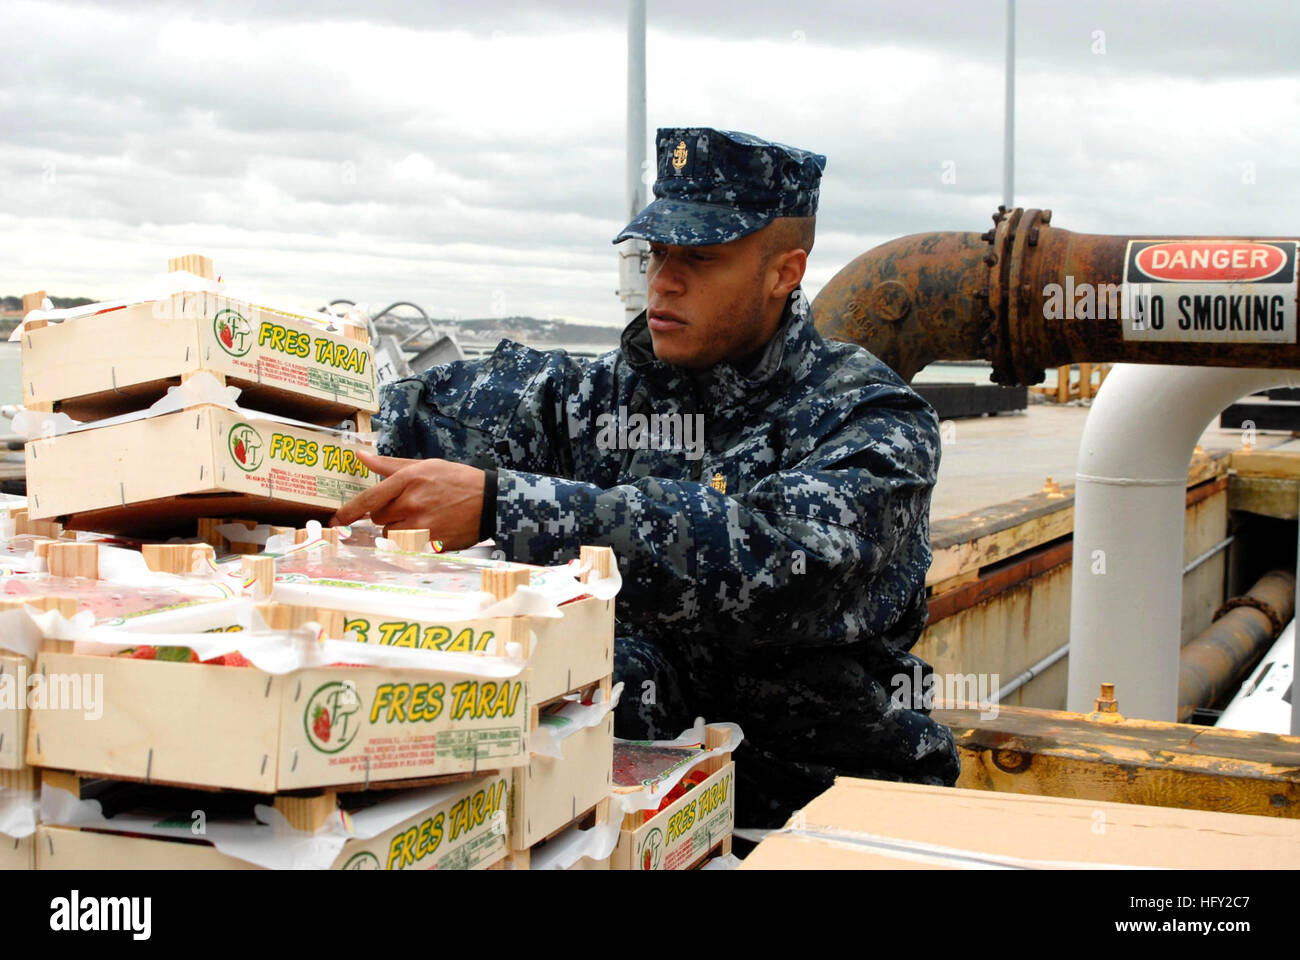 100218-N-3358S-078 ROTA, Spain (Feb. 18, 2010) Chief Hospital Corpsman Jolando Lightner inspects fruit before the crew moves pallets of frozen food, fresh produce and other supplies aboard the amphibious transport dock ship USS Mesa Verde (LPD 19). This is the first port call for Mesa Verde during her maiden deployment to the U.S. 5th Fleet area of responsibility. (U.S. Navy photo by Mass Communication Specialist 1st Class Steve Smith/Released) US Navy 100218-N-3358S-078 Chief Hospital Corpsman Jolando Lightner inspects fruit before the crew moves pallets of frozen food, fresh produce and othe Stock Photo